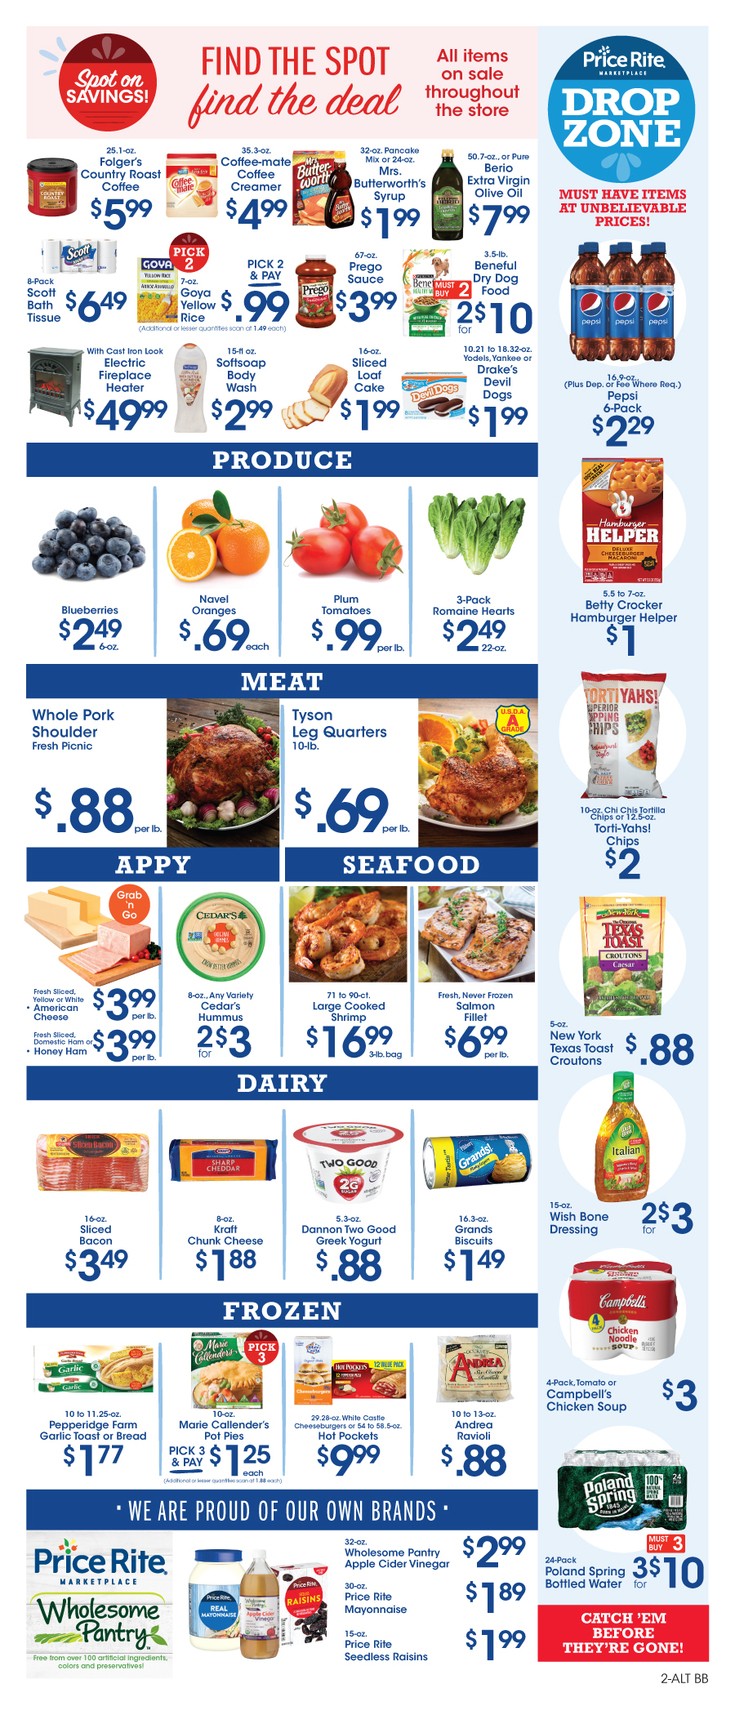 Price Rite Weekly Ad from October 4